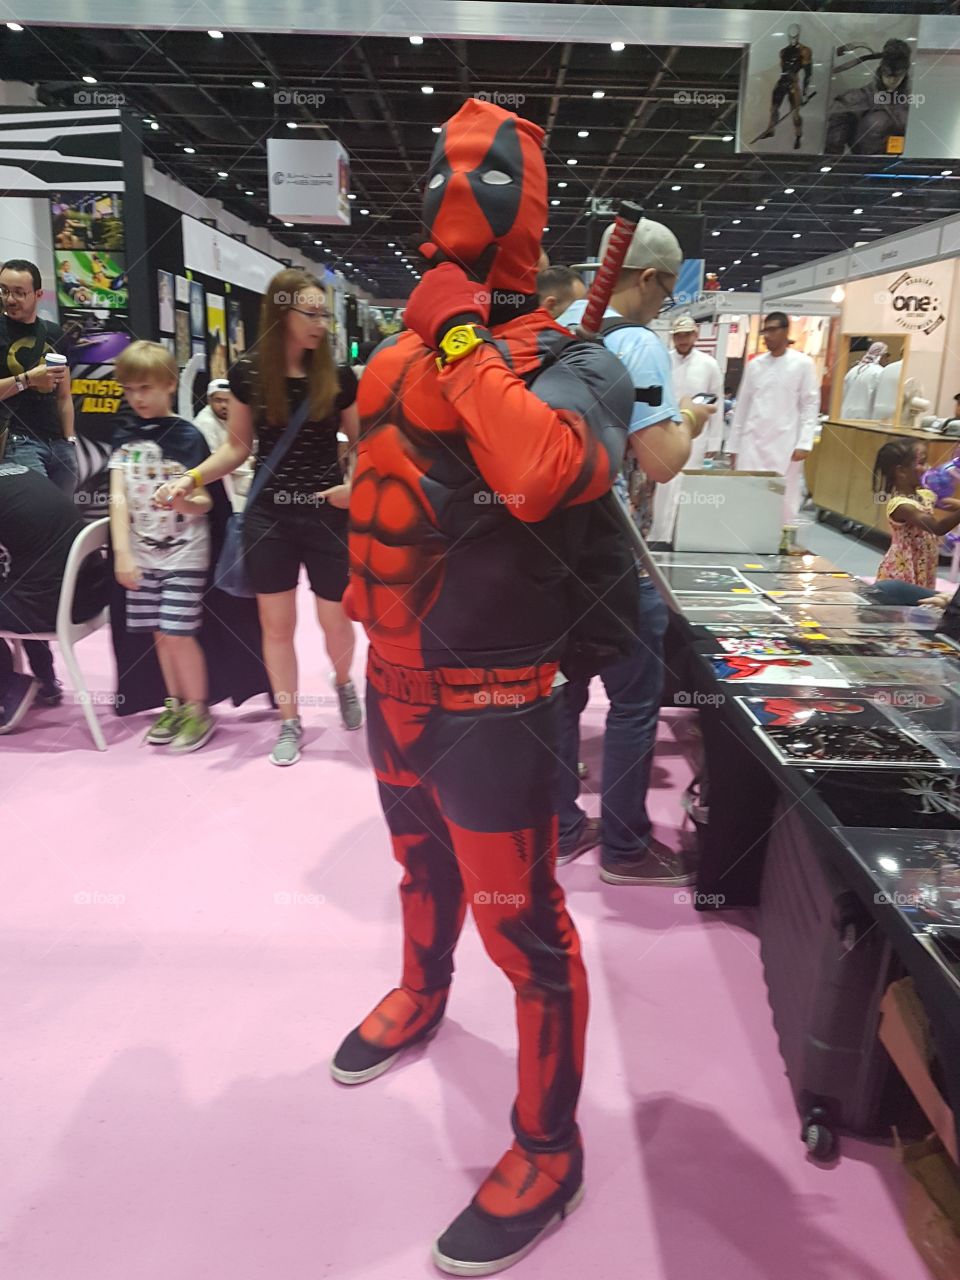 Deadpool with dad bods.